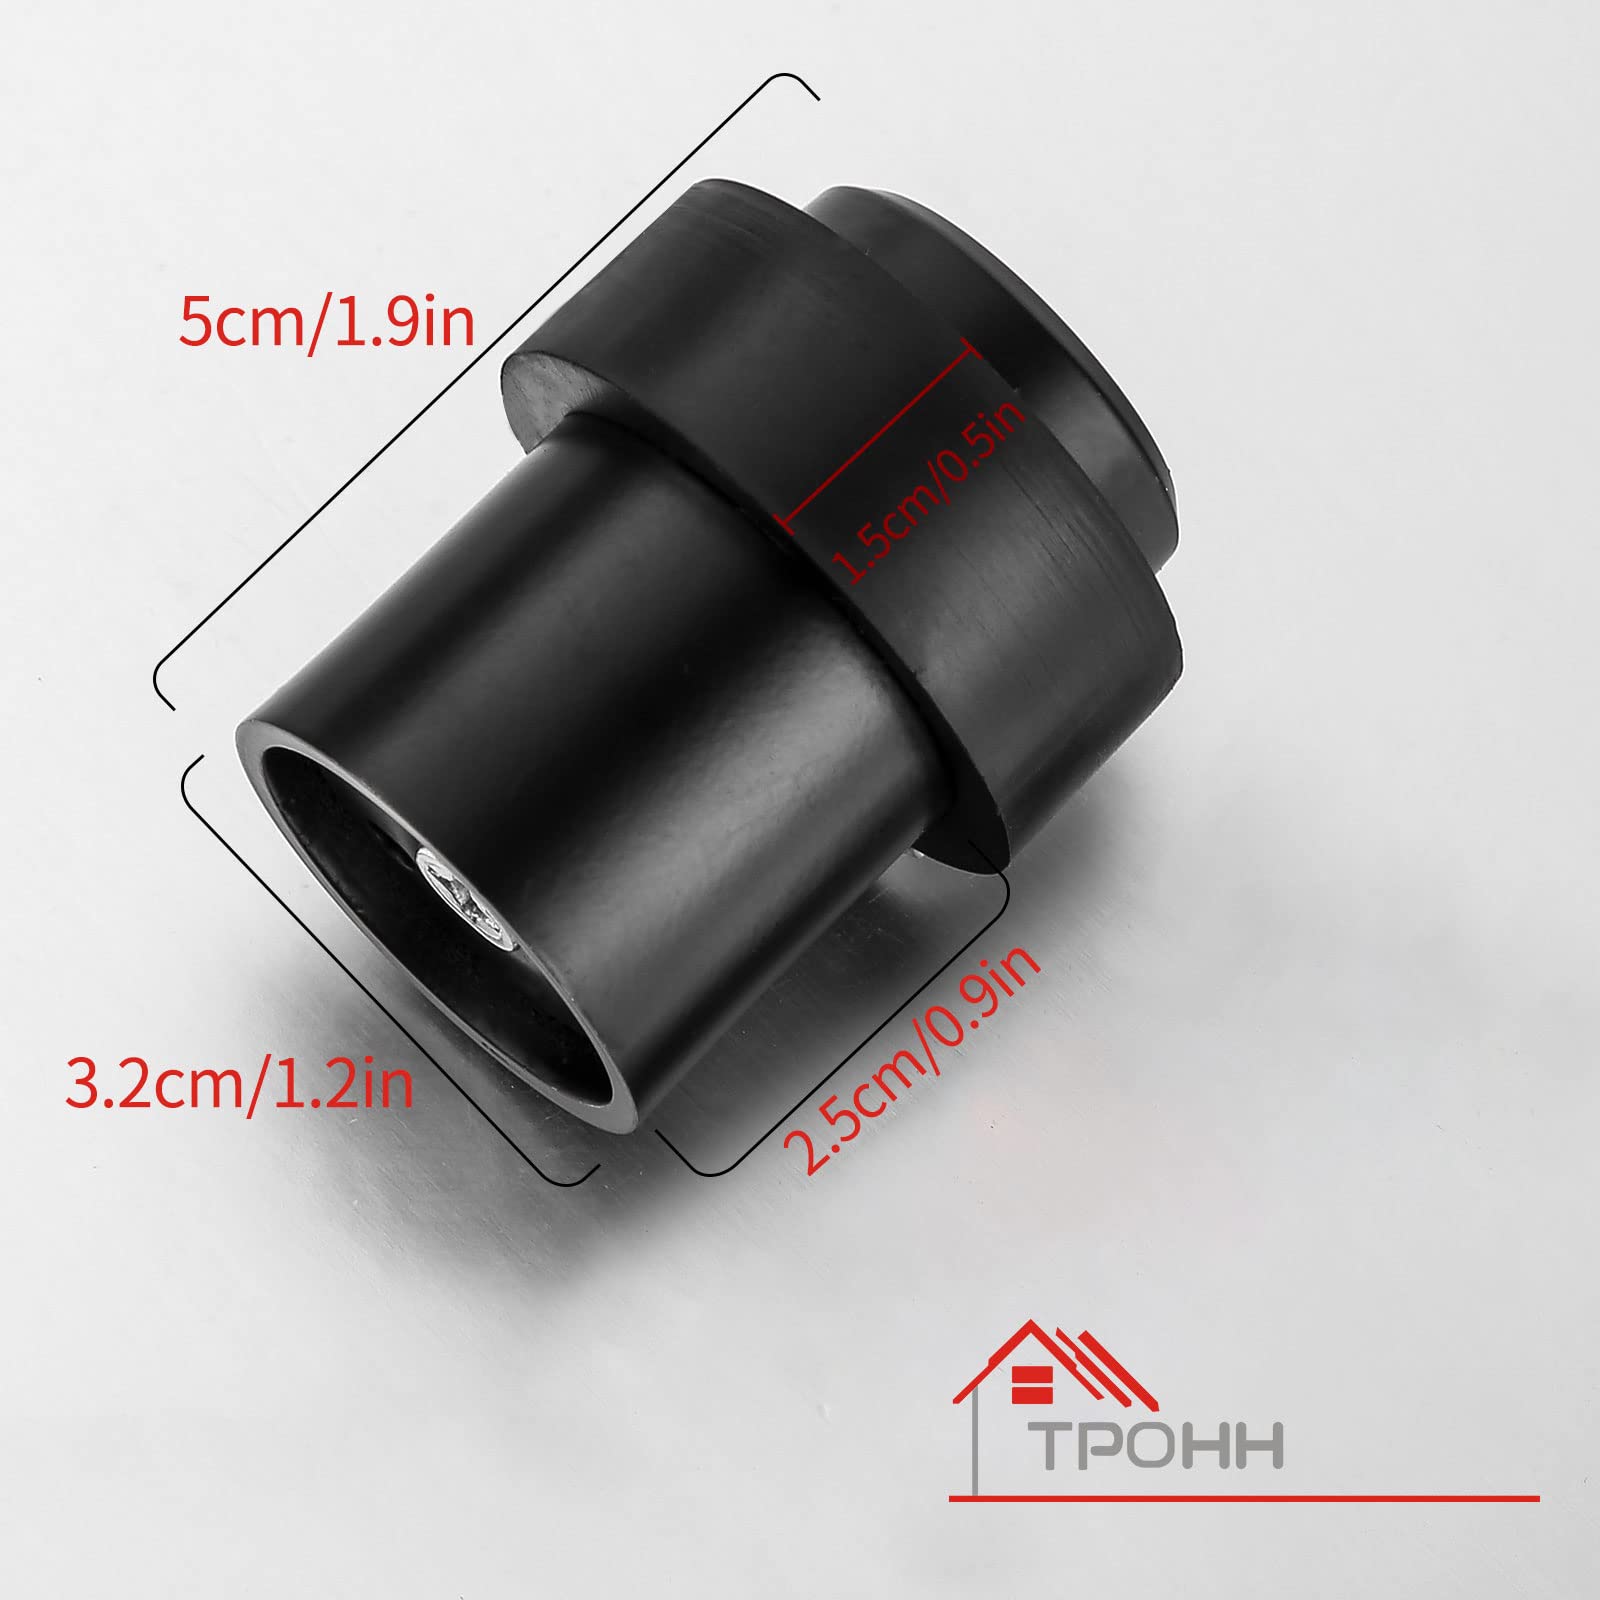 TPOHH Stainless Steel Cylindrical Floor Mount Door Stop with Soft Rubber - Heavy Duty Durable Door Stoppers Wall Protector, Black 1-3/4" Height